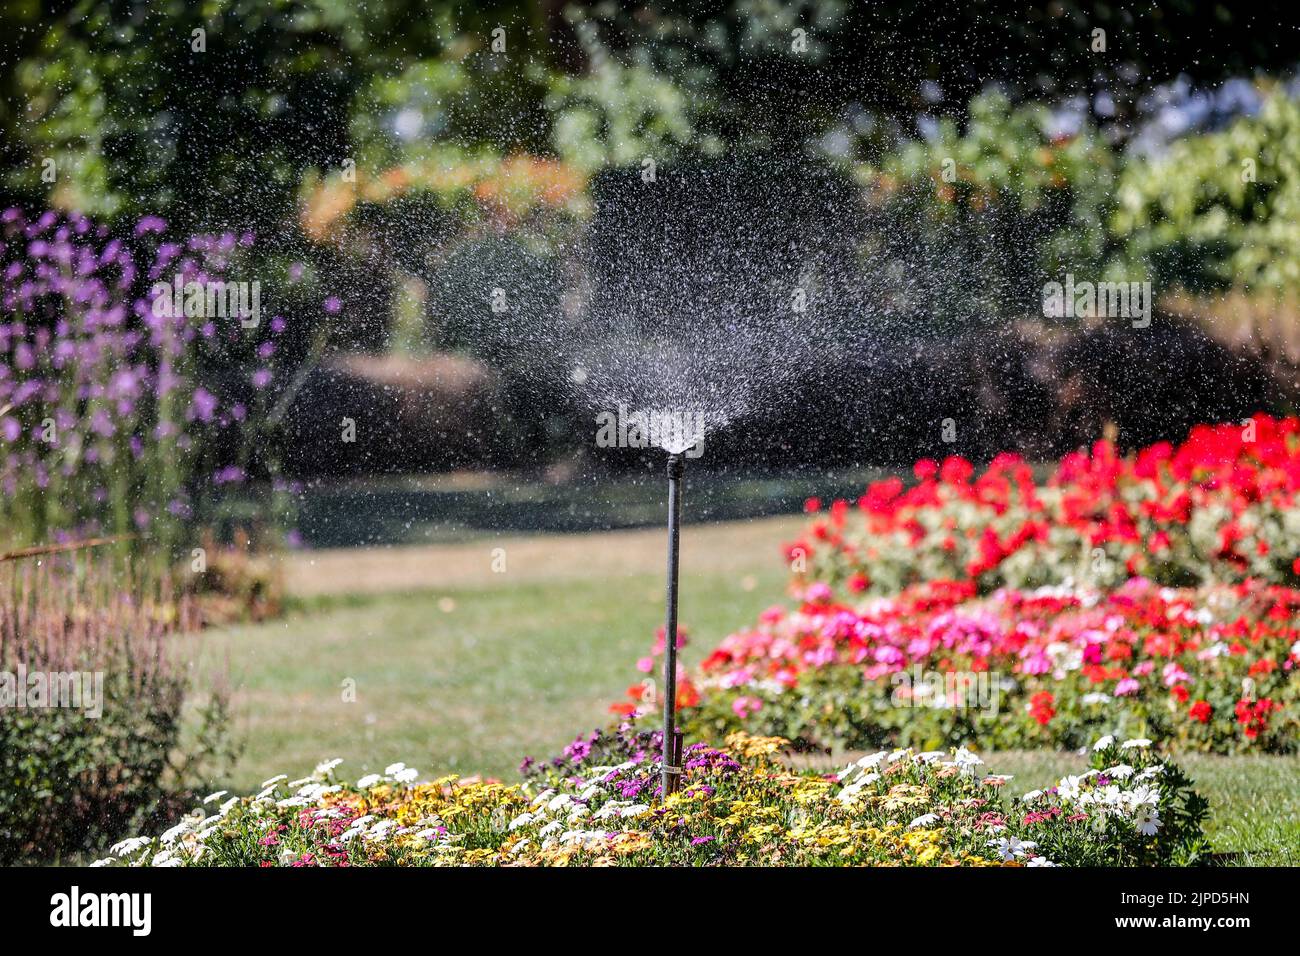 London, UK. 11th Aug, 2022. A sprinkler seen watering flowers in London. Thames Water has announced that a hosepipe and sprinkler ban will come into force from 24 August 2022 that will affect over 10 million customers across the south of England. Credit: SOPA Images Limited/Alamy Live News Stock Photo